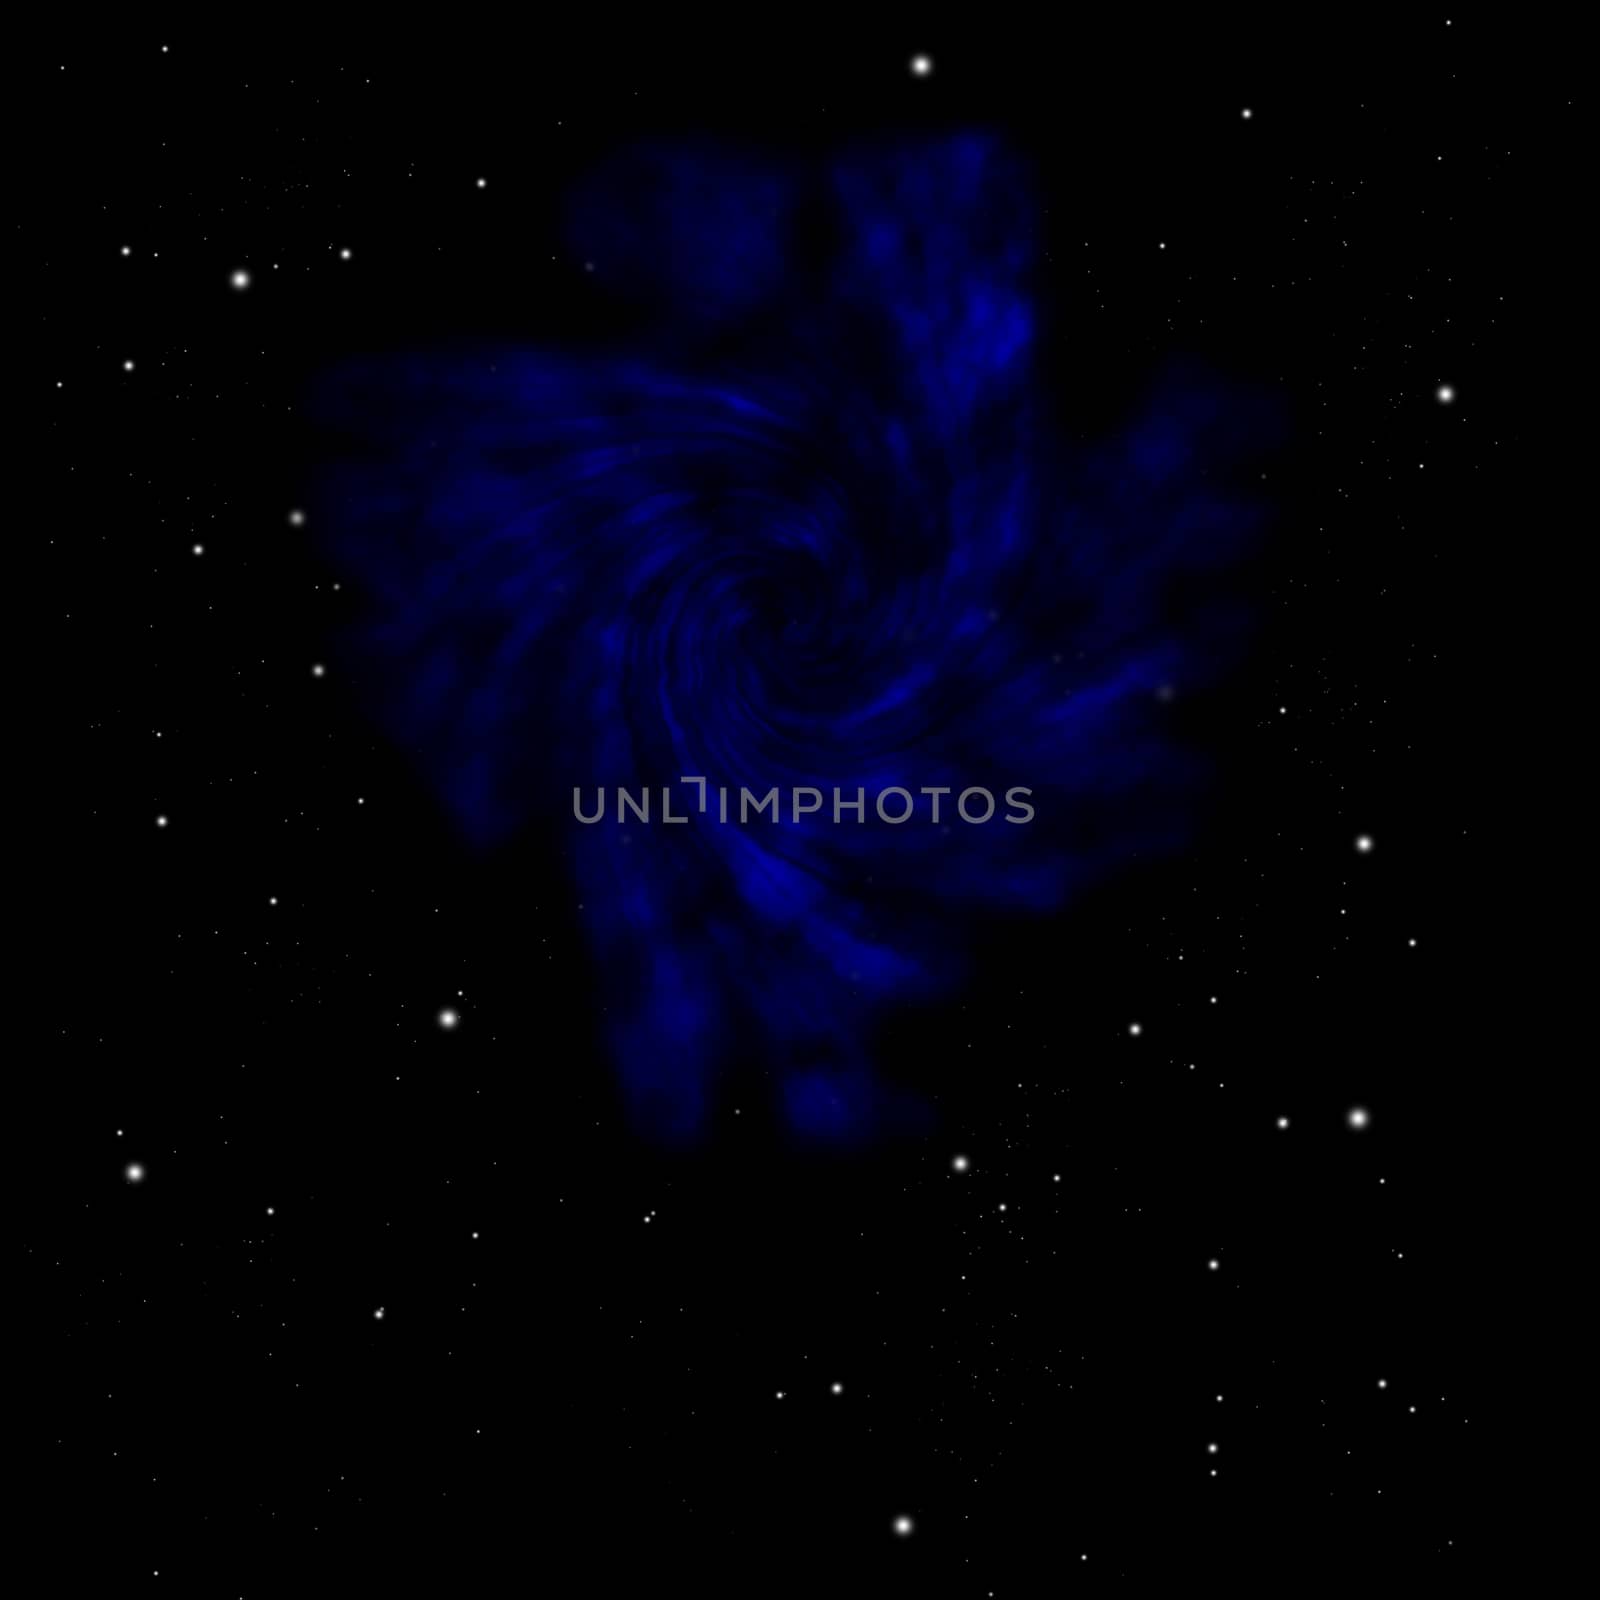 Distant flickering star array and cold cosmic nebula. by richter1910